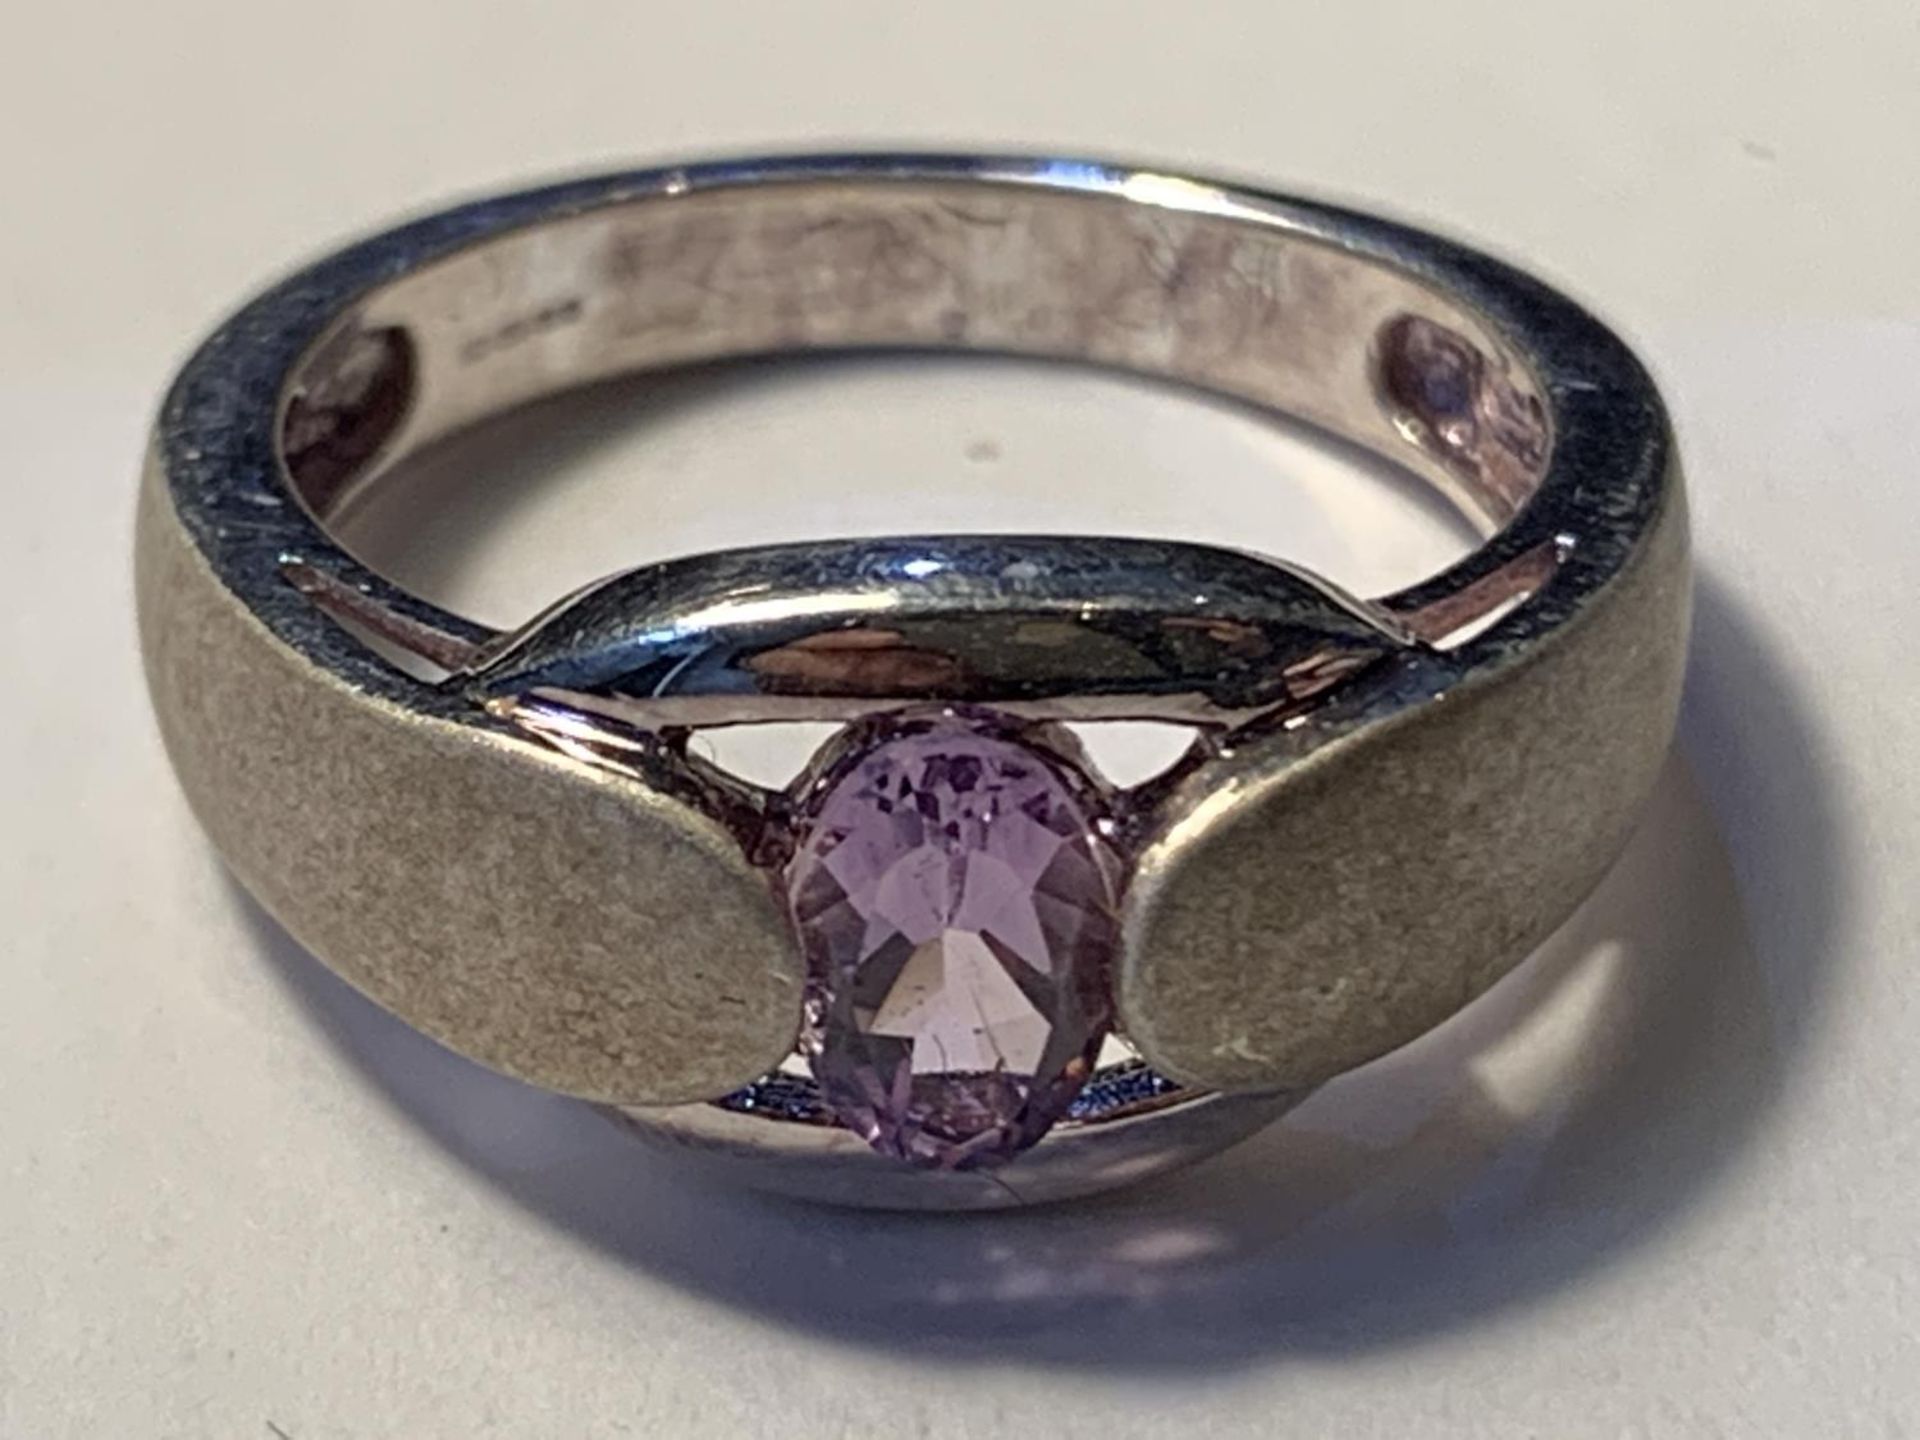 A SILVER AND AMETHYST RING IN A PRESENTATION BOX - Image 2 of 5